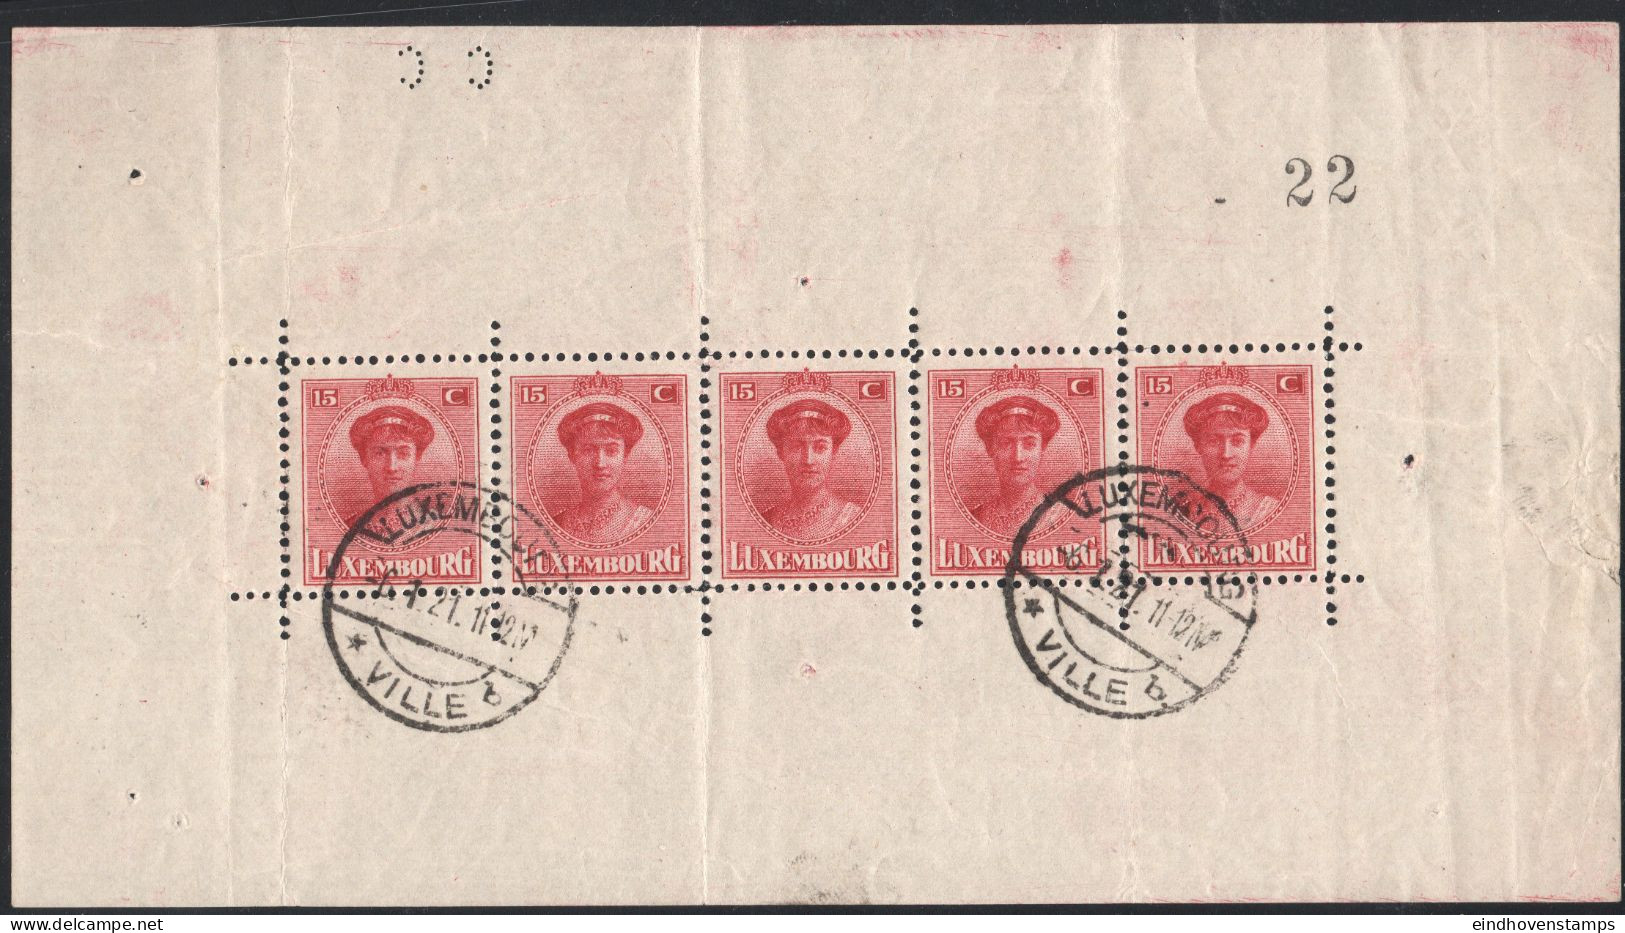 Luxemburg 1921 Jan 6 Minisheet Of 5 Stamps Charlotte FDC Cancel Folds And Usual Wrinkles Outside The Stamps - 1921-27 Charlotte Front Side